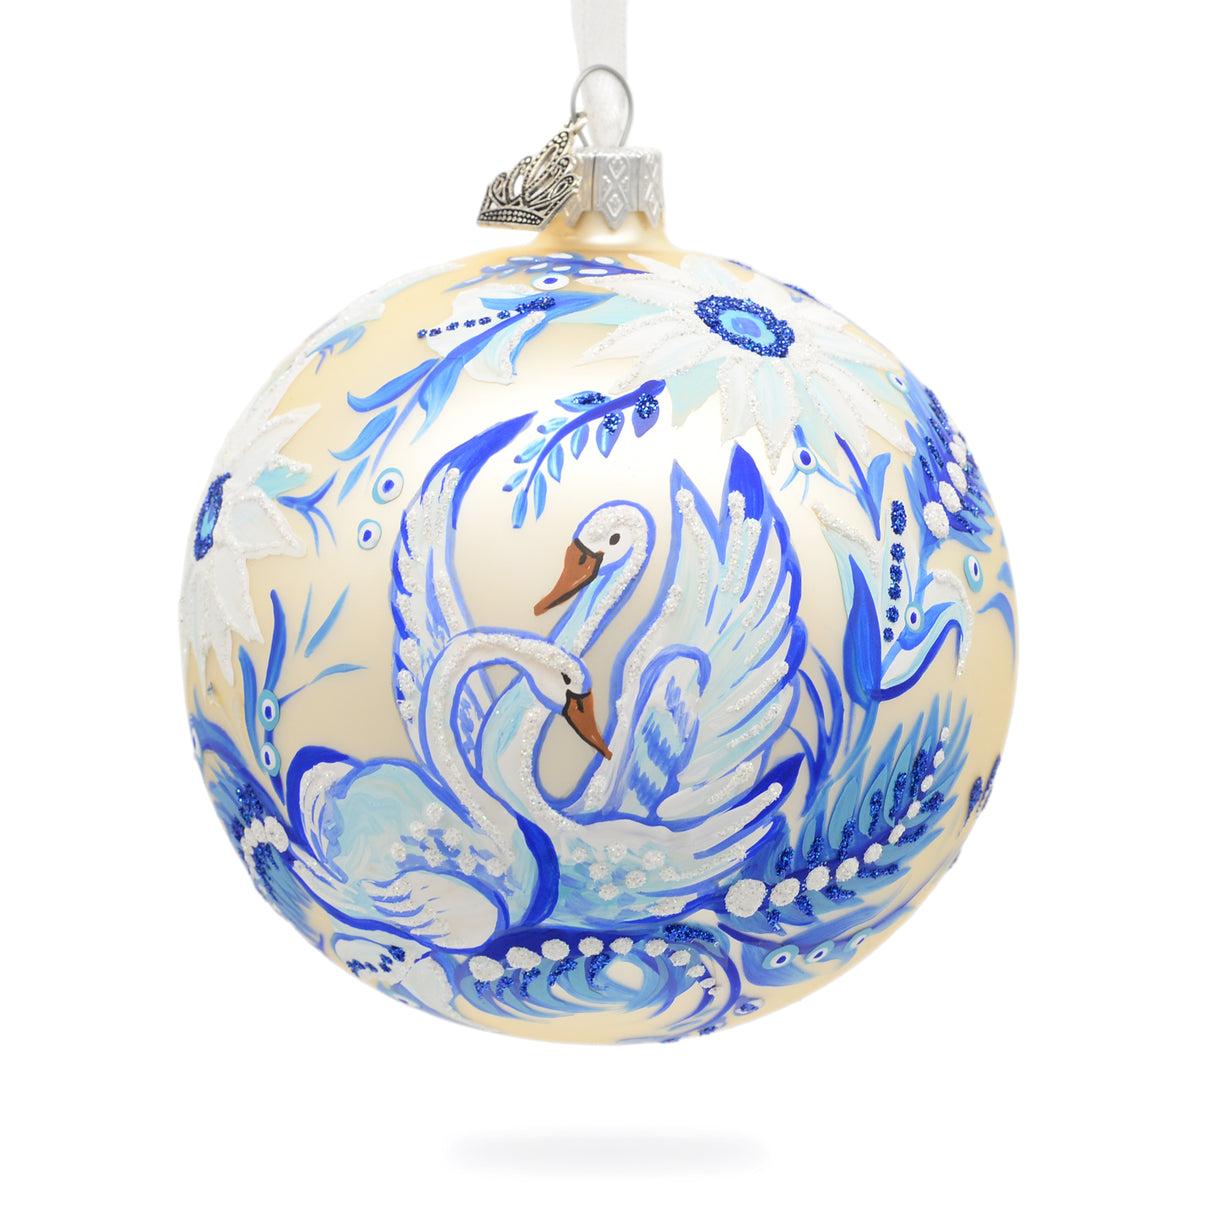 Glass Swans in Daisies Garden Glass Ball Ornament in Blue color Round